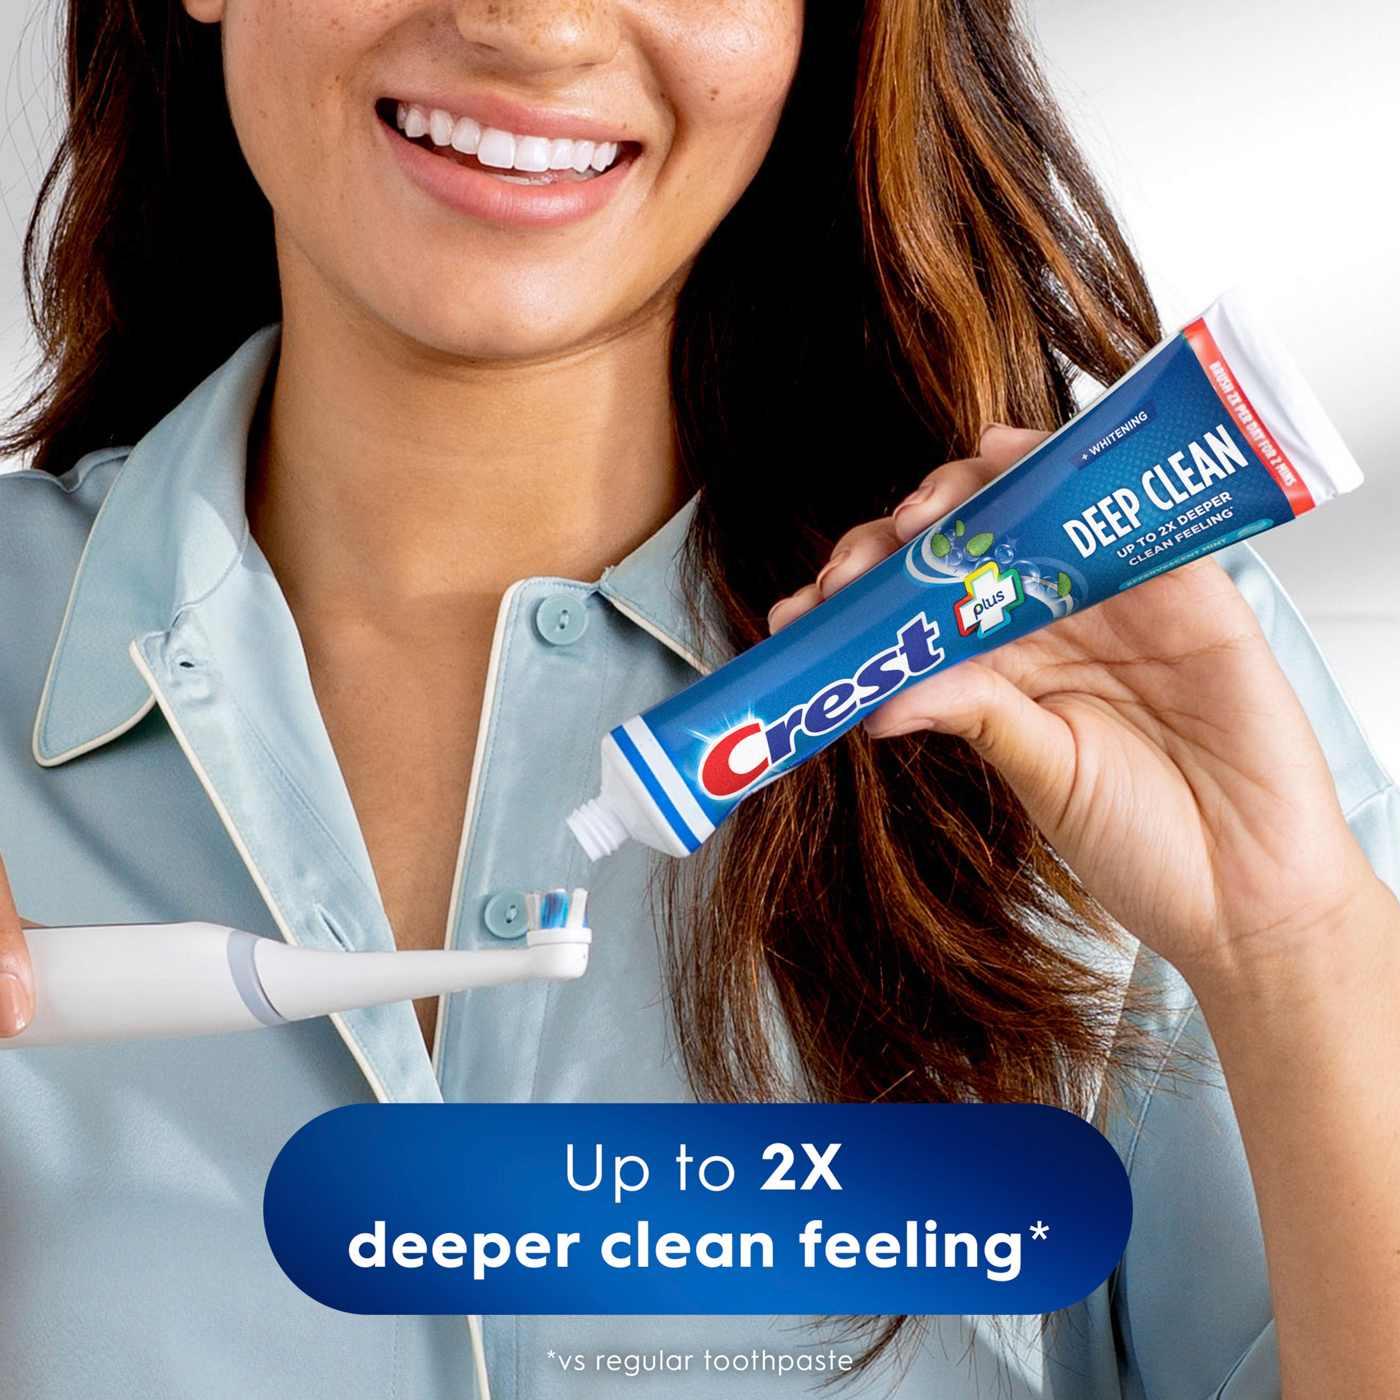 Crest Complete + Deep Clean Whitening Toothpaste - Effervescent Mint; image 6 of 10